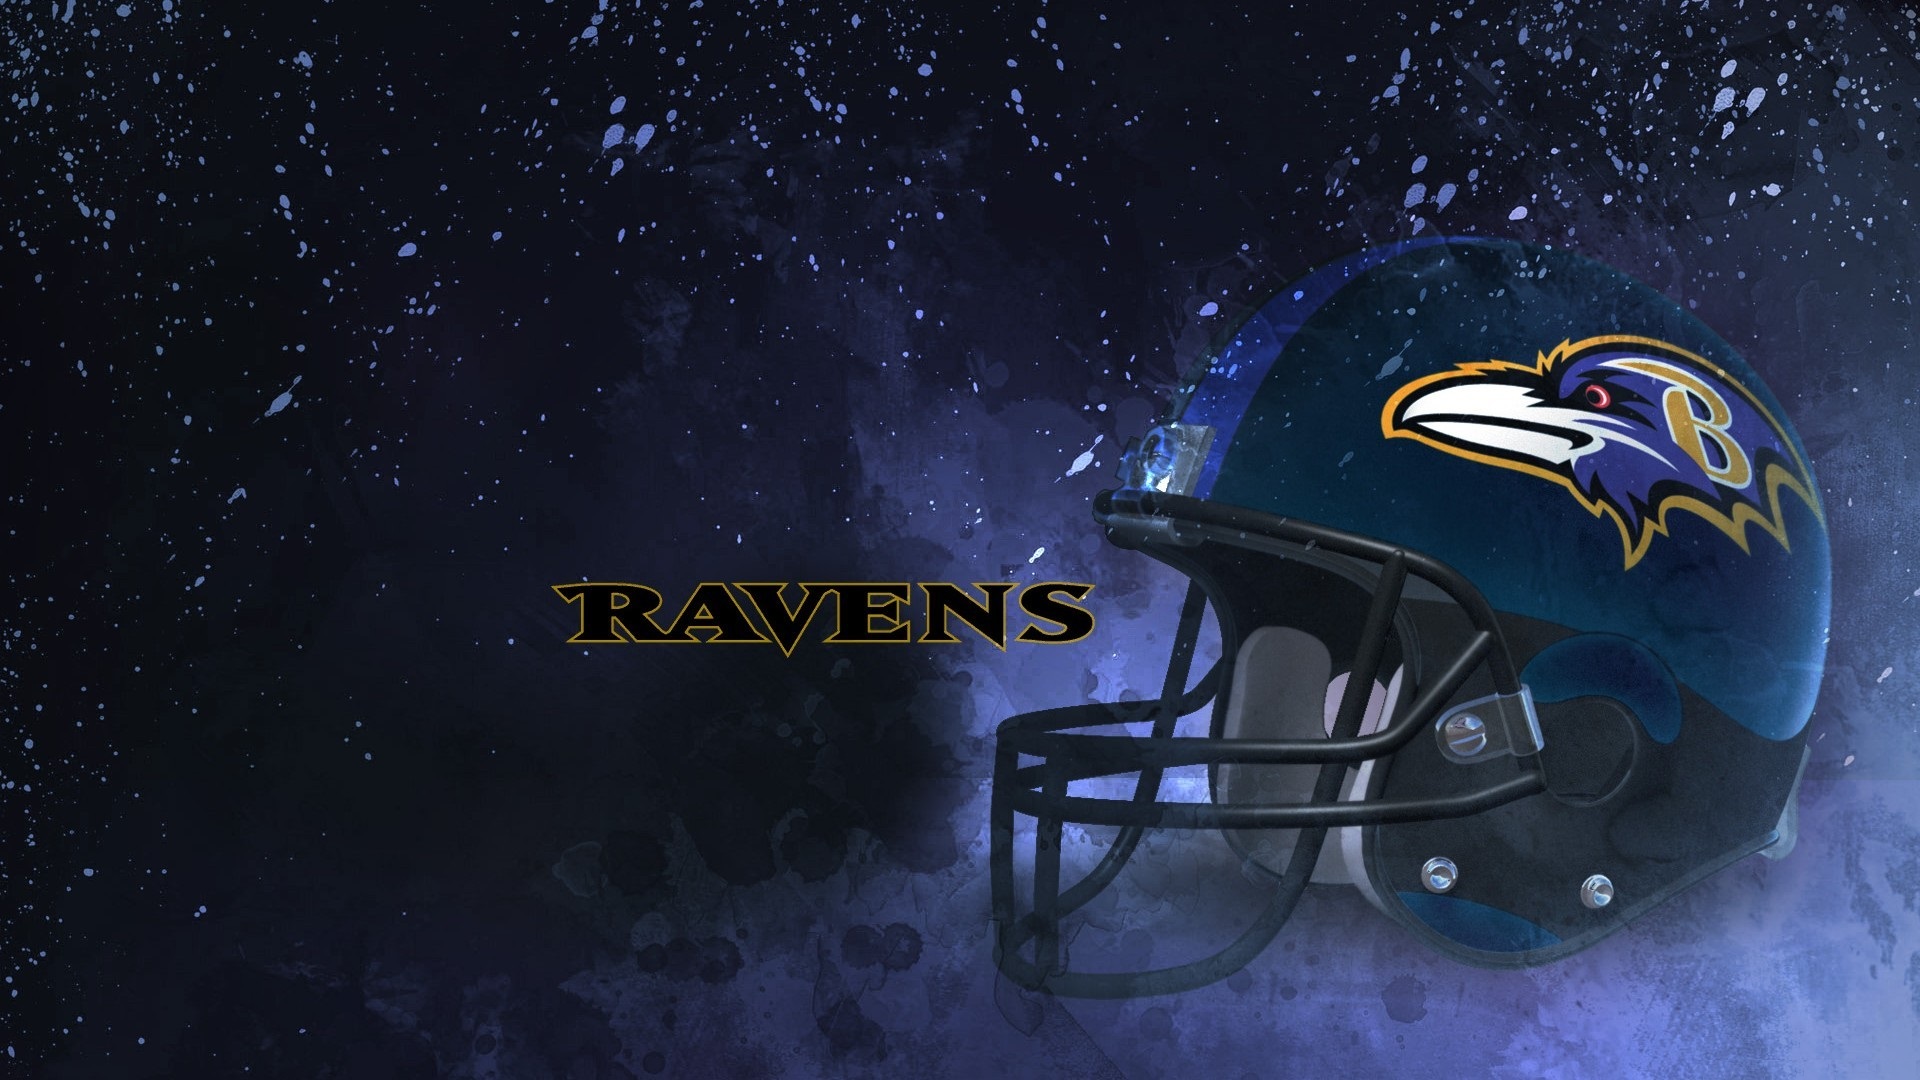 Ravens Wallpaper HD With high-resolution 1920X1080 pixel. You can use this wallpaper for your Mac or Windows Desktop Background, iPhone, Android or Tablet and another Smartphone device